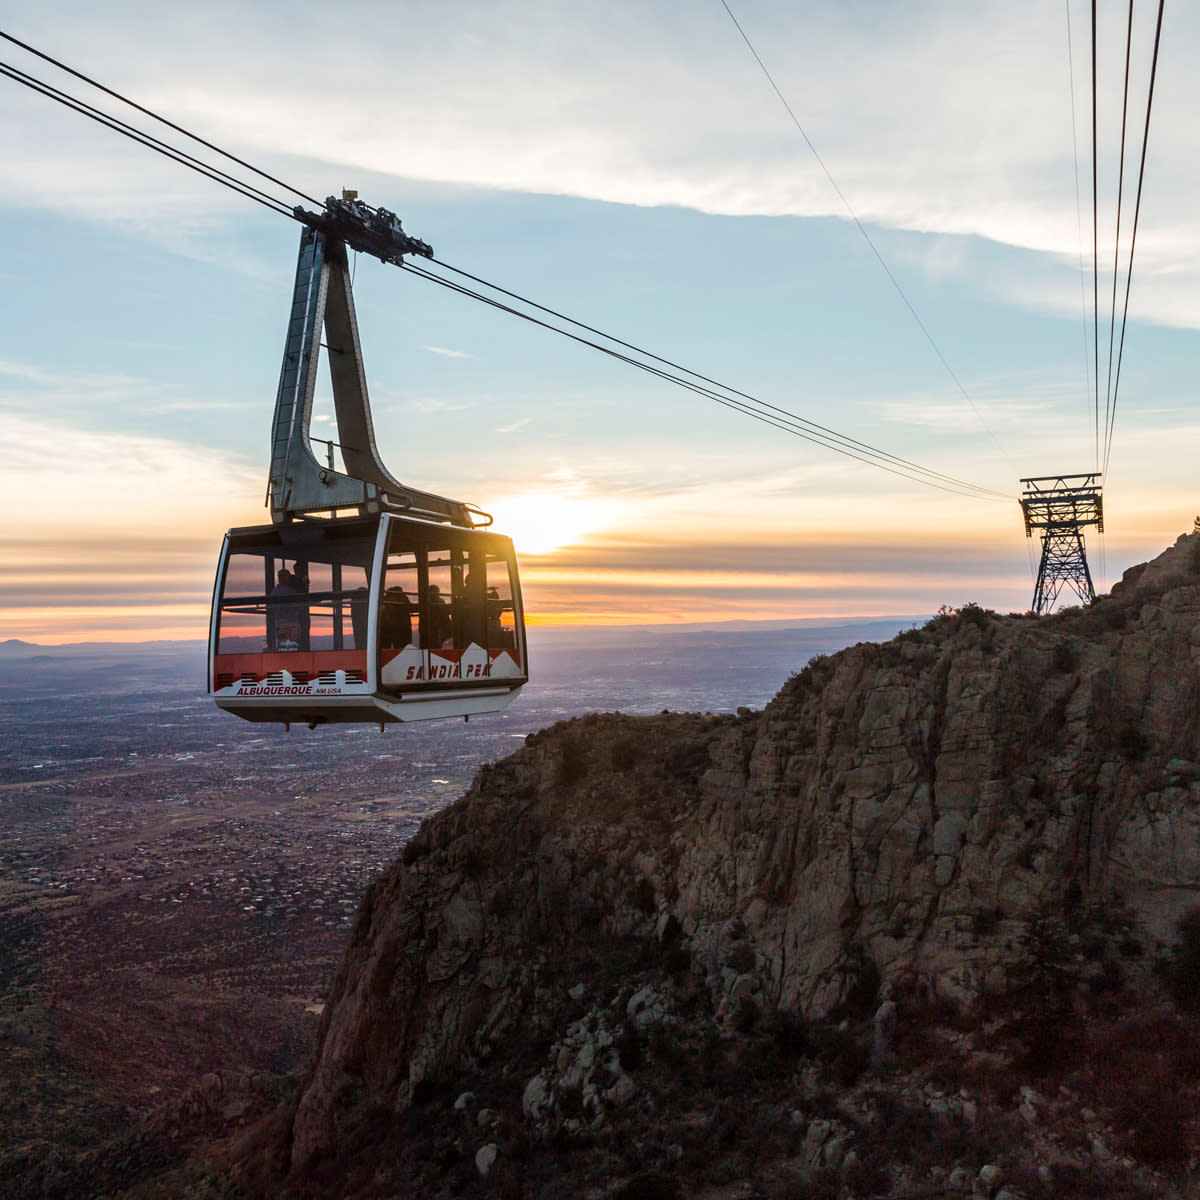 Sandia Peak Aerial Tramway with a breathtaking view on 